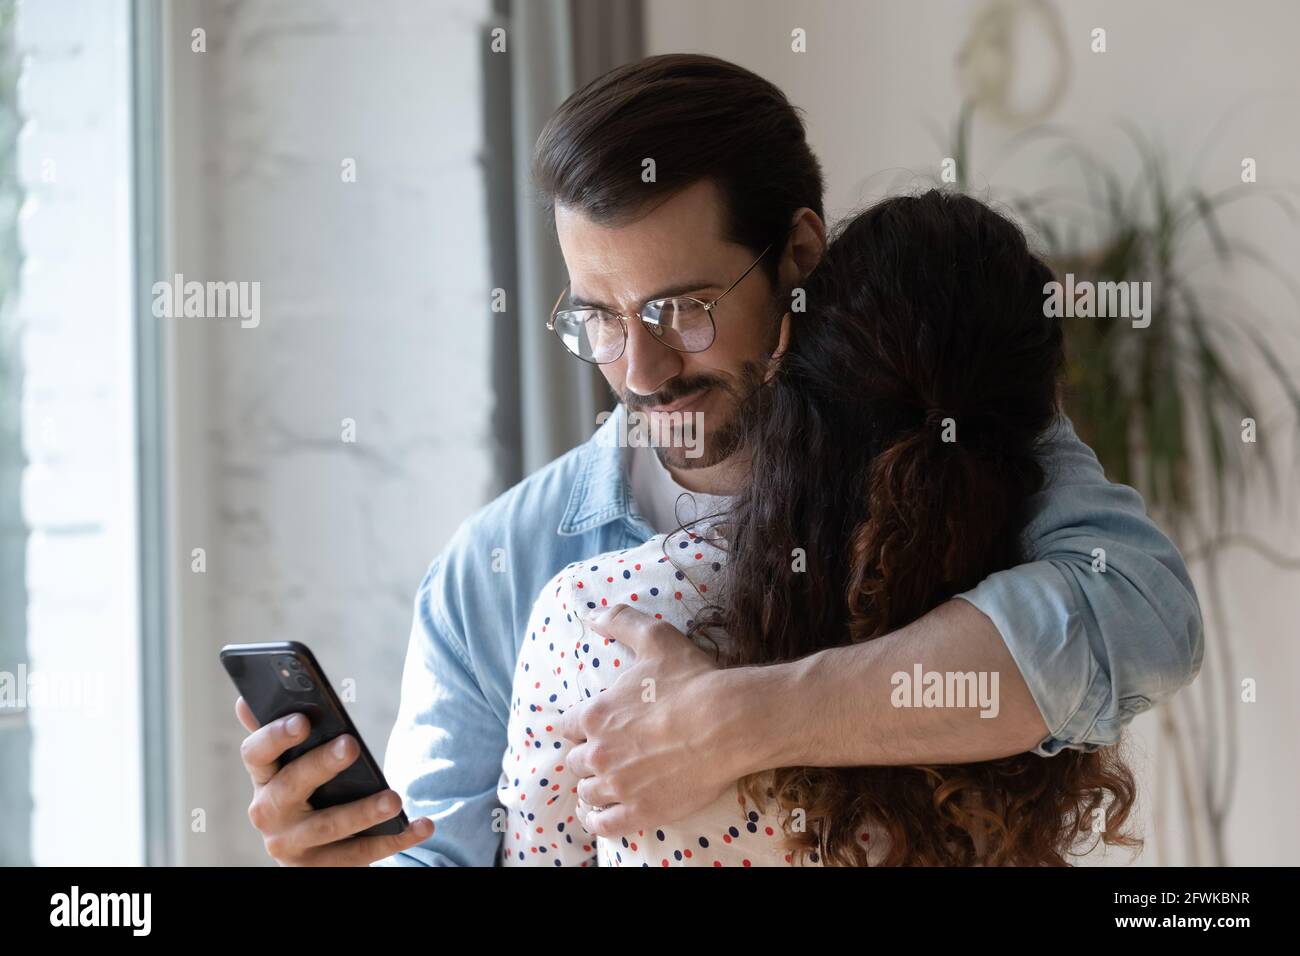 Dishonest young man using phone while cuddling wife. Stock Photo